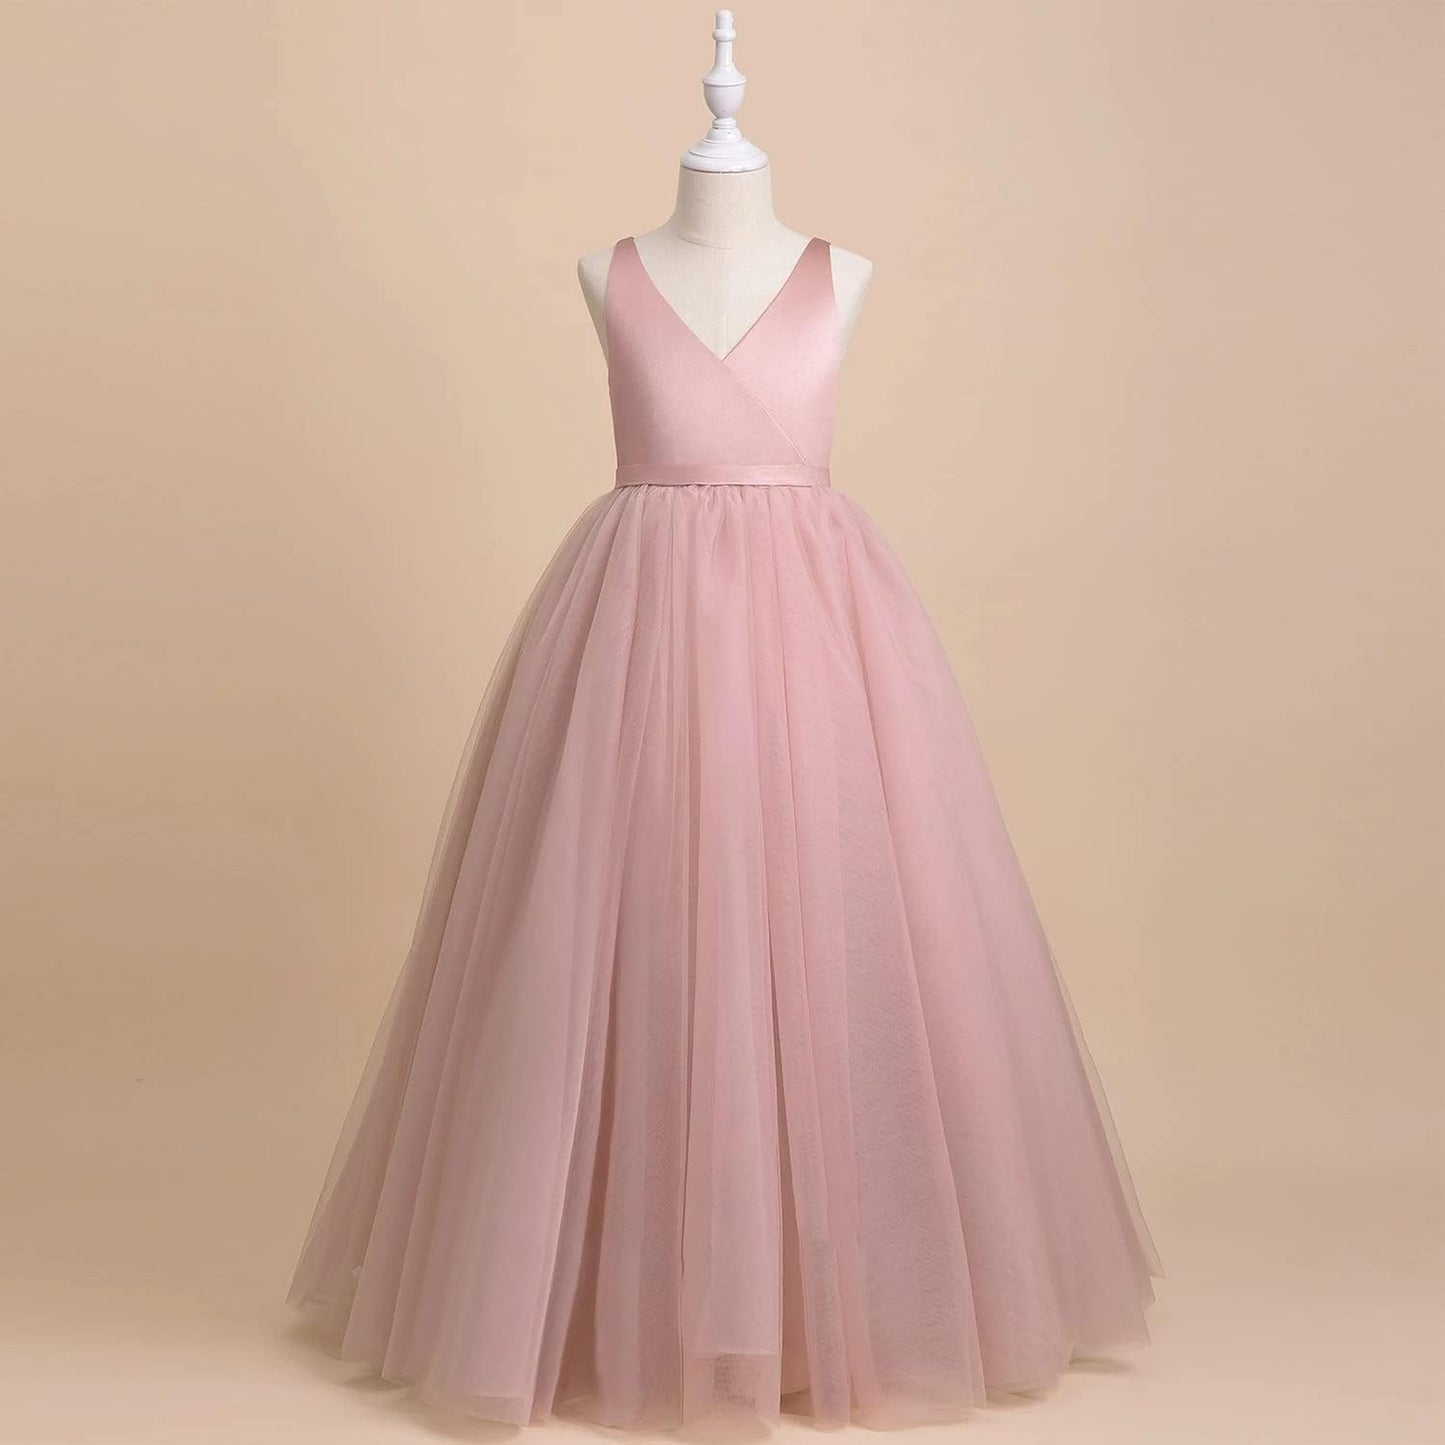 Tulle Bridesmaid Dress Girl Ball Gown with Bow